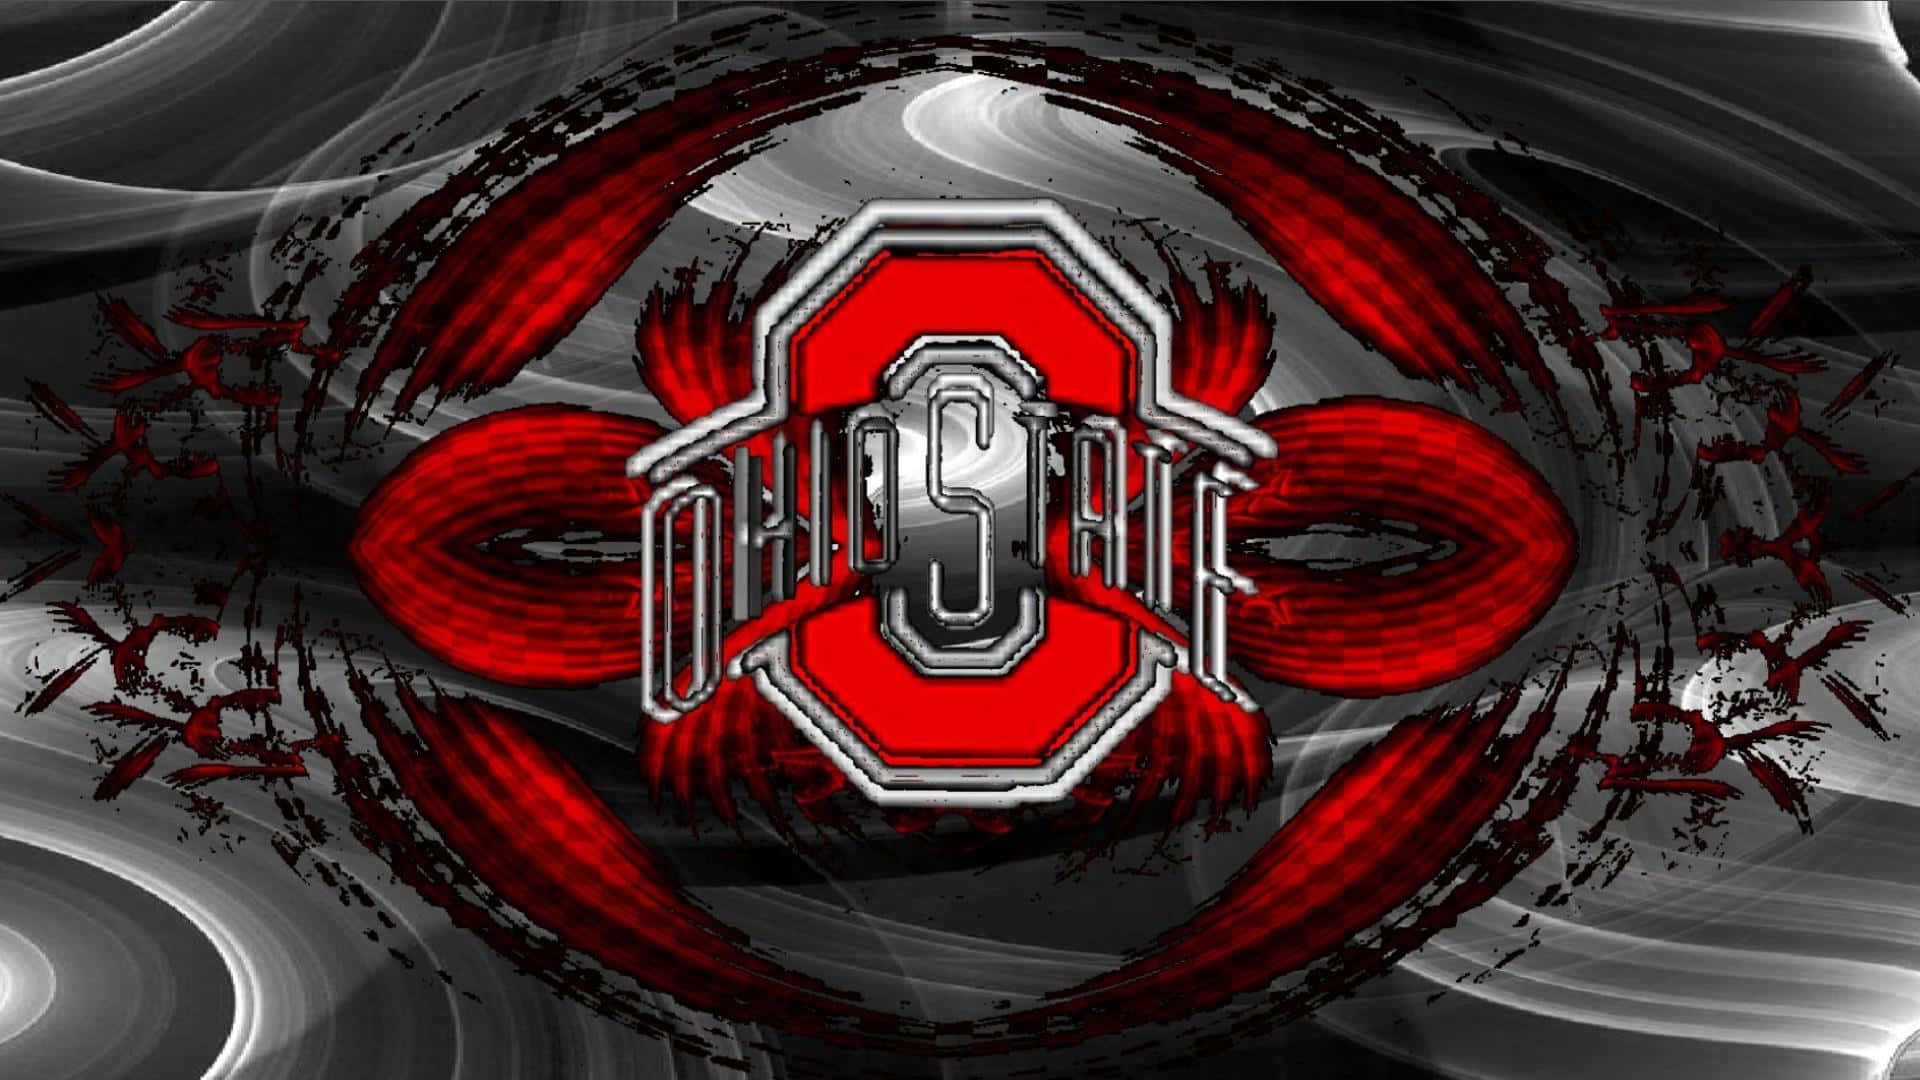 Show your Buckeye pride with this awesome Cool Ohio State wallpaper! Wallpaper